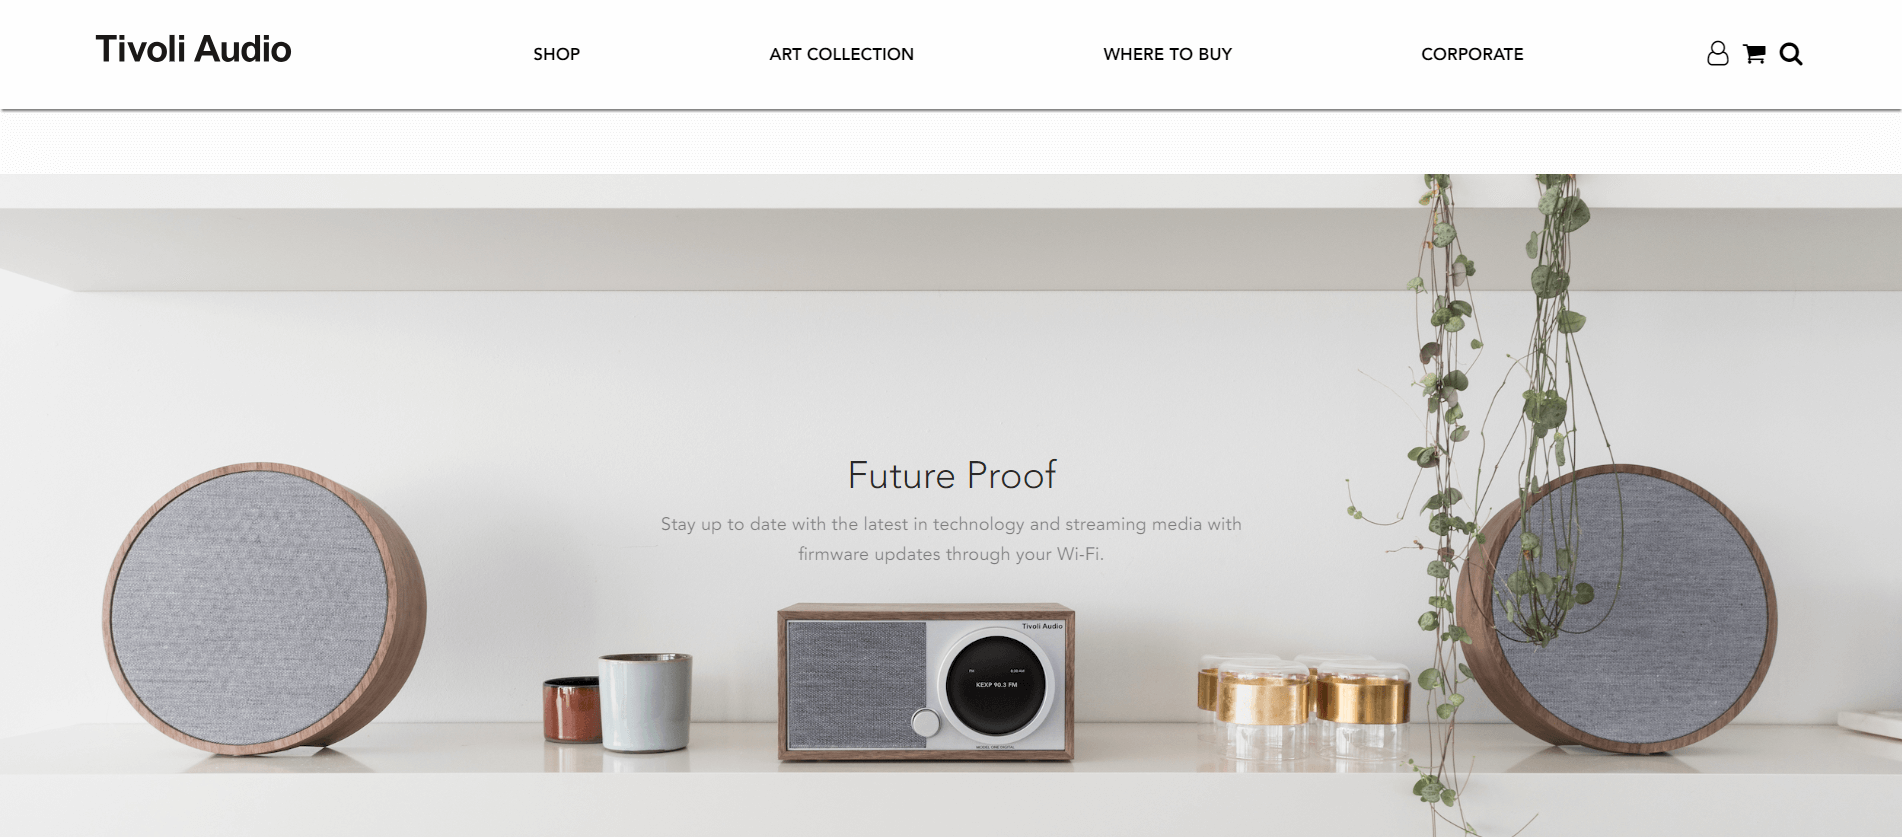 eCommerce product page mistake: Tivoli Audio product page as a good example